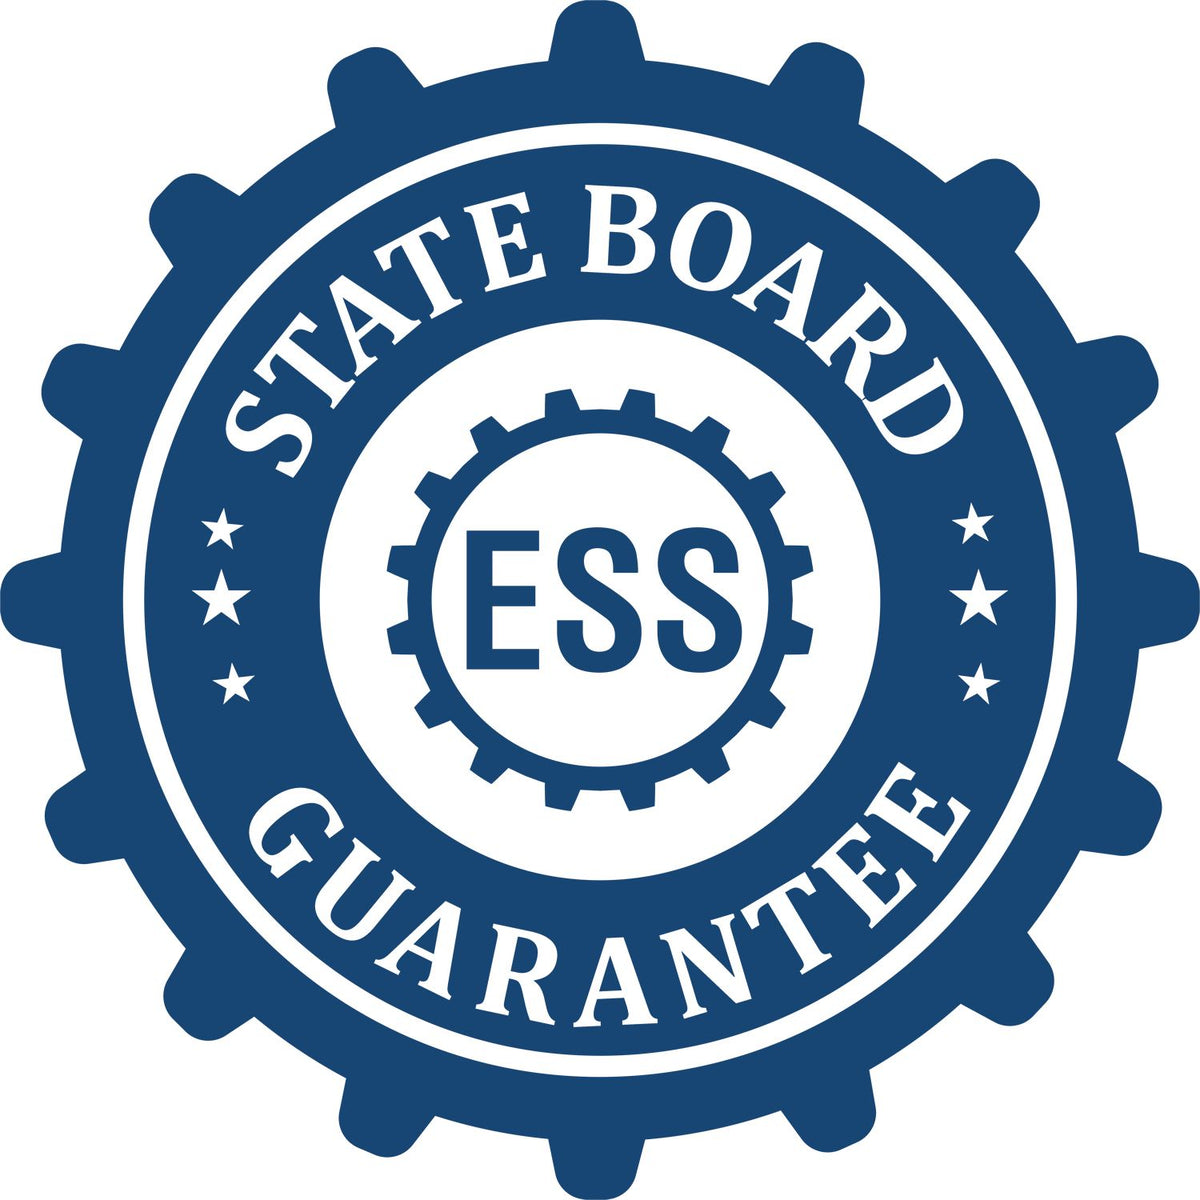 An emblem in a gear shape illustrating a state board guarantee for the Digital Missouri Geologist Stamp, Electronic Seal for Missouri Geologist